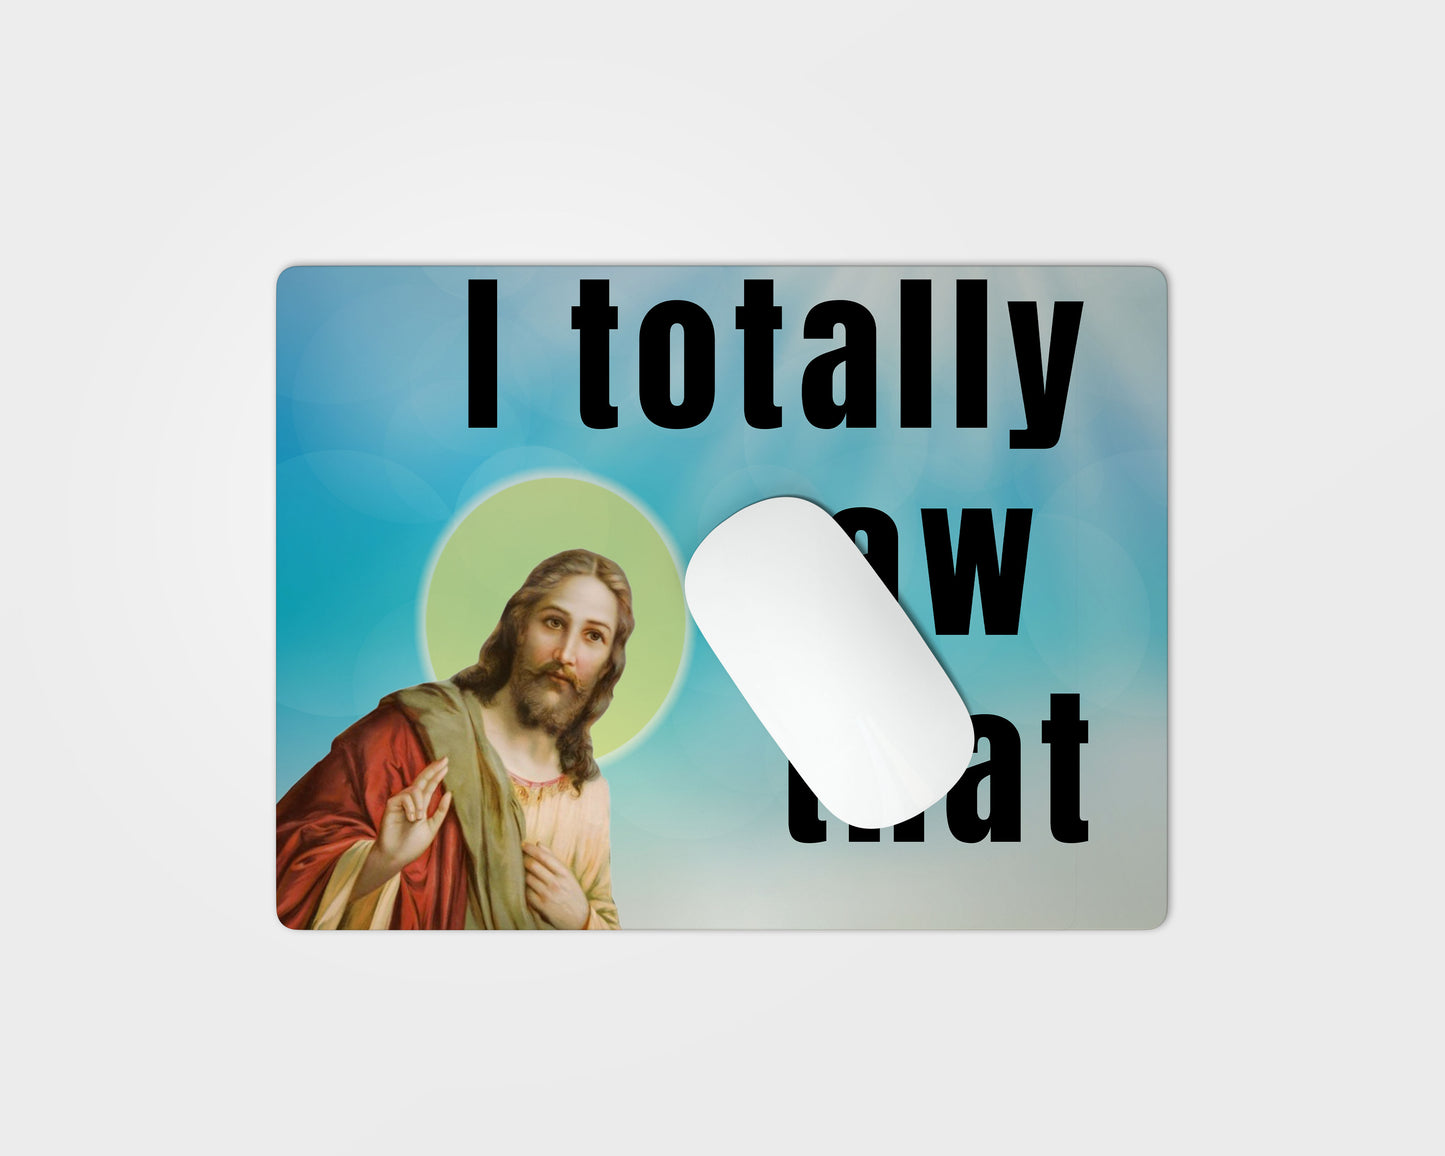 Jesus - I totally saw that - Mouse pad funny mouse pad I saw that Jesus Meme Jesus mousepad mouse pad mouse pad cute mouse pad funny mousepad for desk mousepad for her mousepad for men